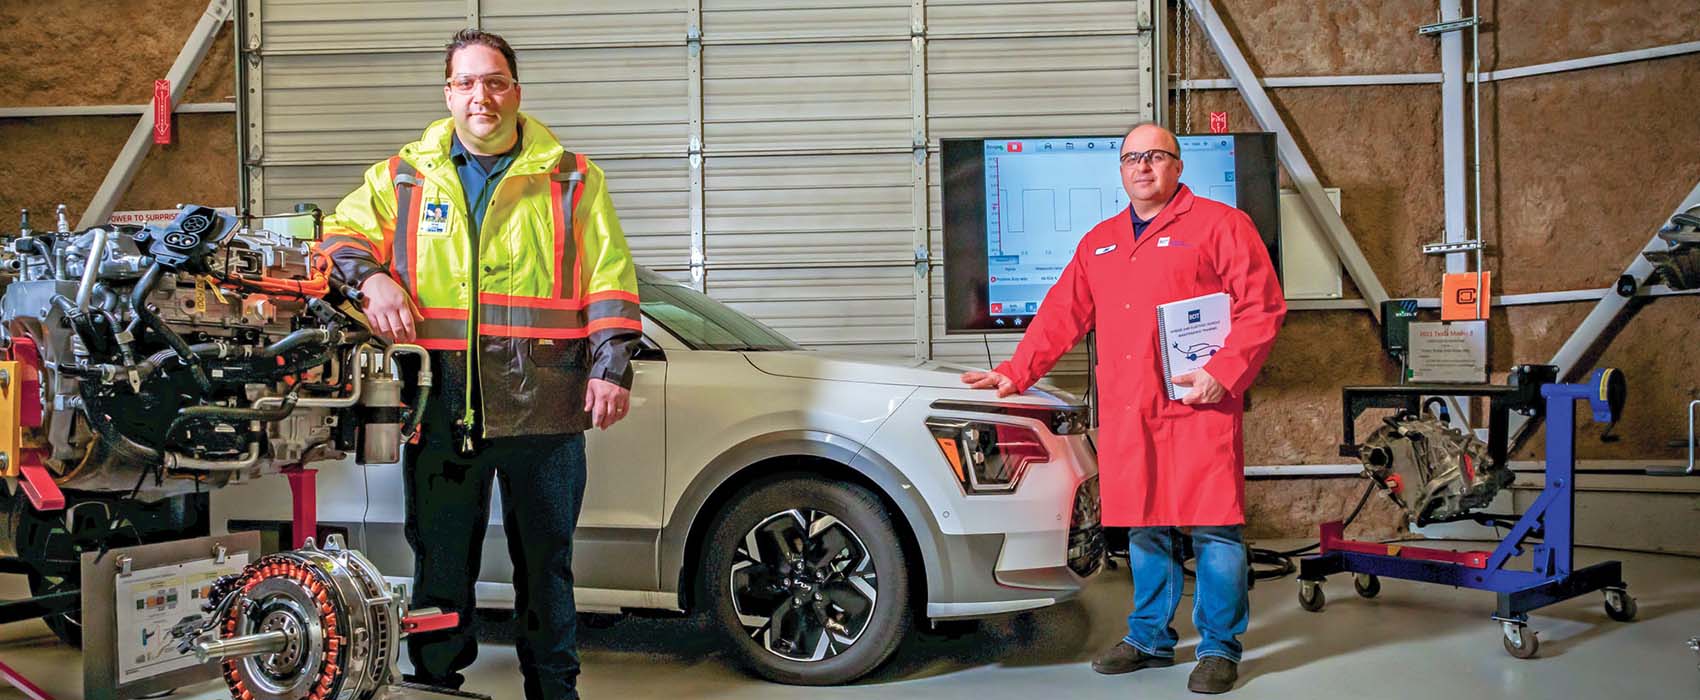 BCAA Fleet Trainer Mario Barone and Auto Service instructor Jim Berladyn stand in a garage in front of a white SUV, surrounded by engines